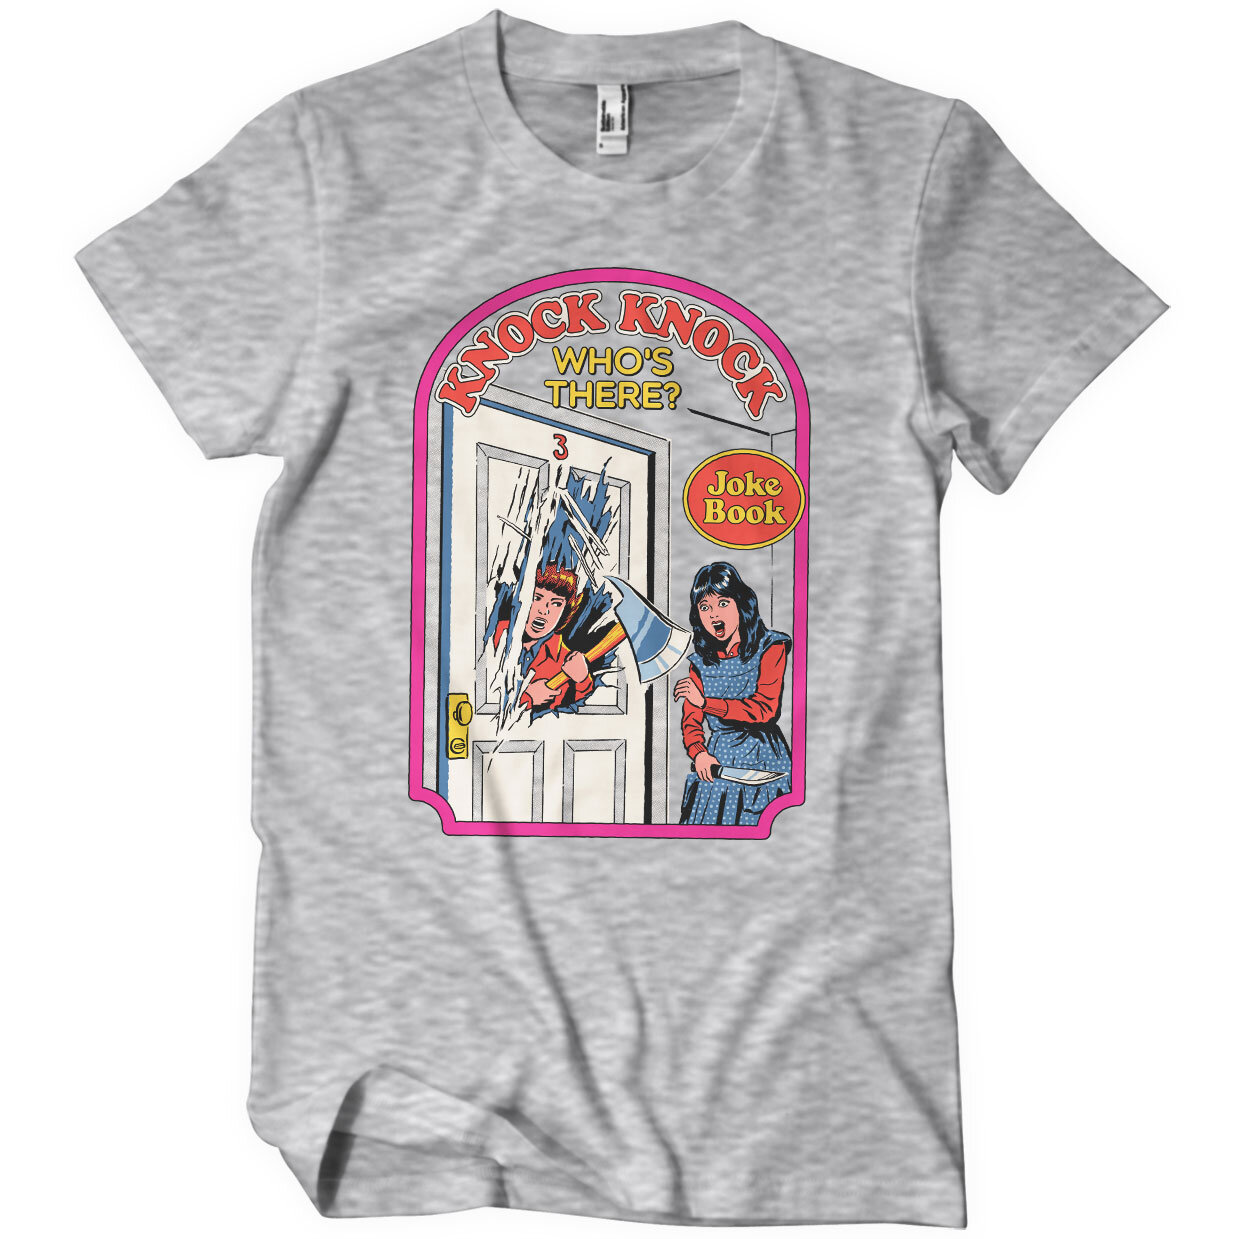 Knock Knock Who's There T-Shirt